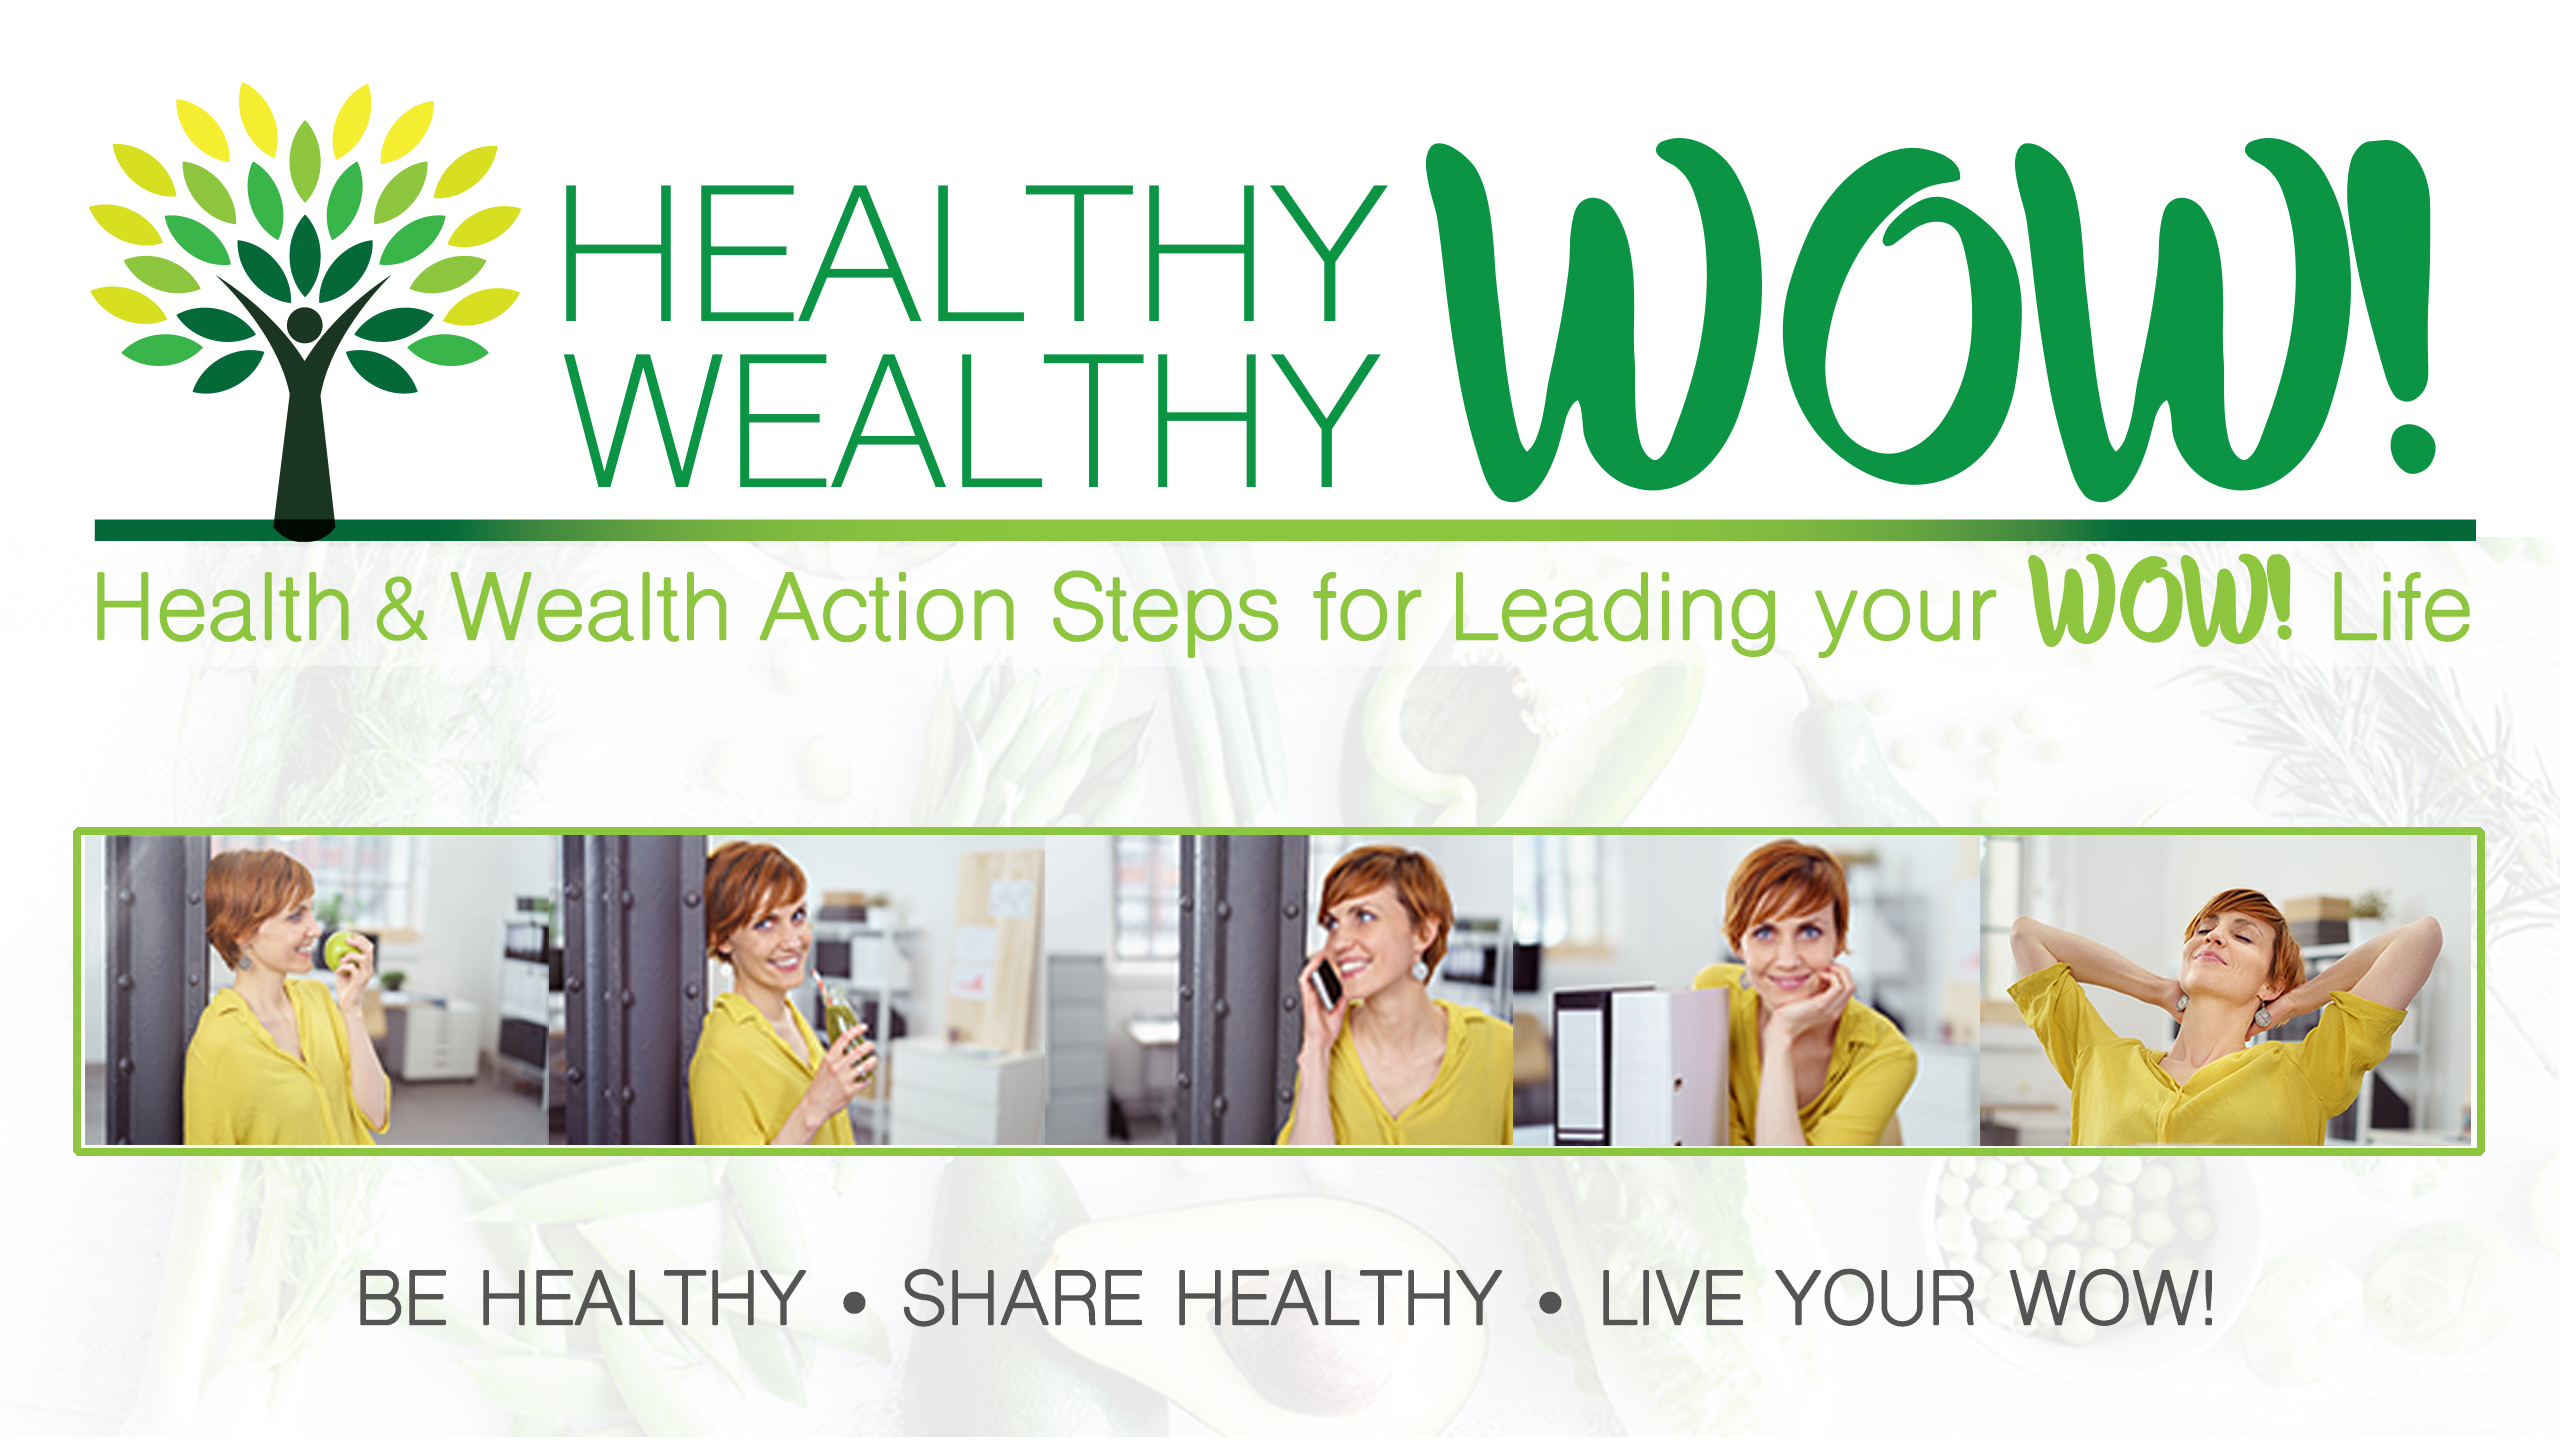 Find out about the Healthy Wealthy Wow Ambassador program at www.healthywealthywow.com